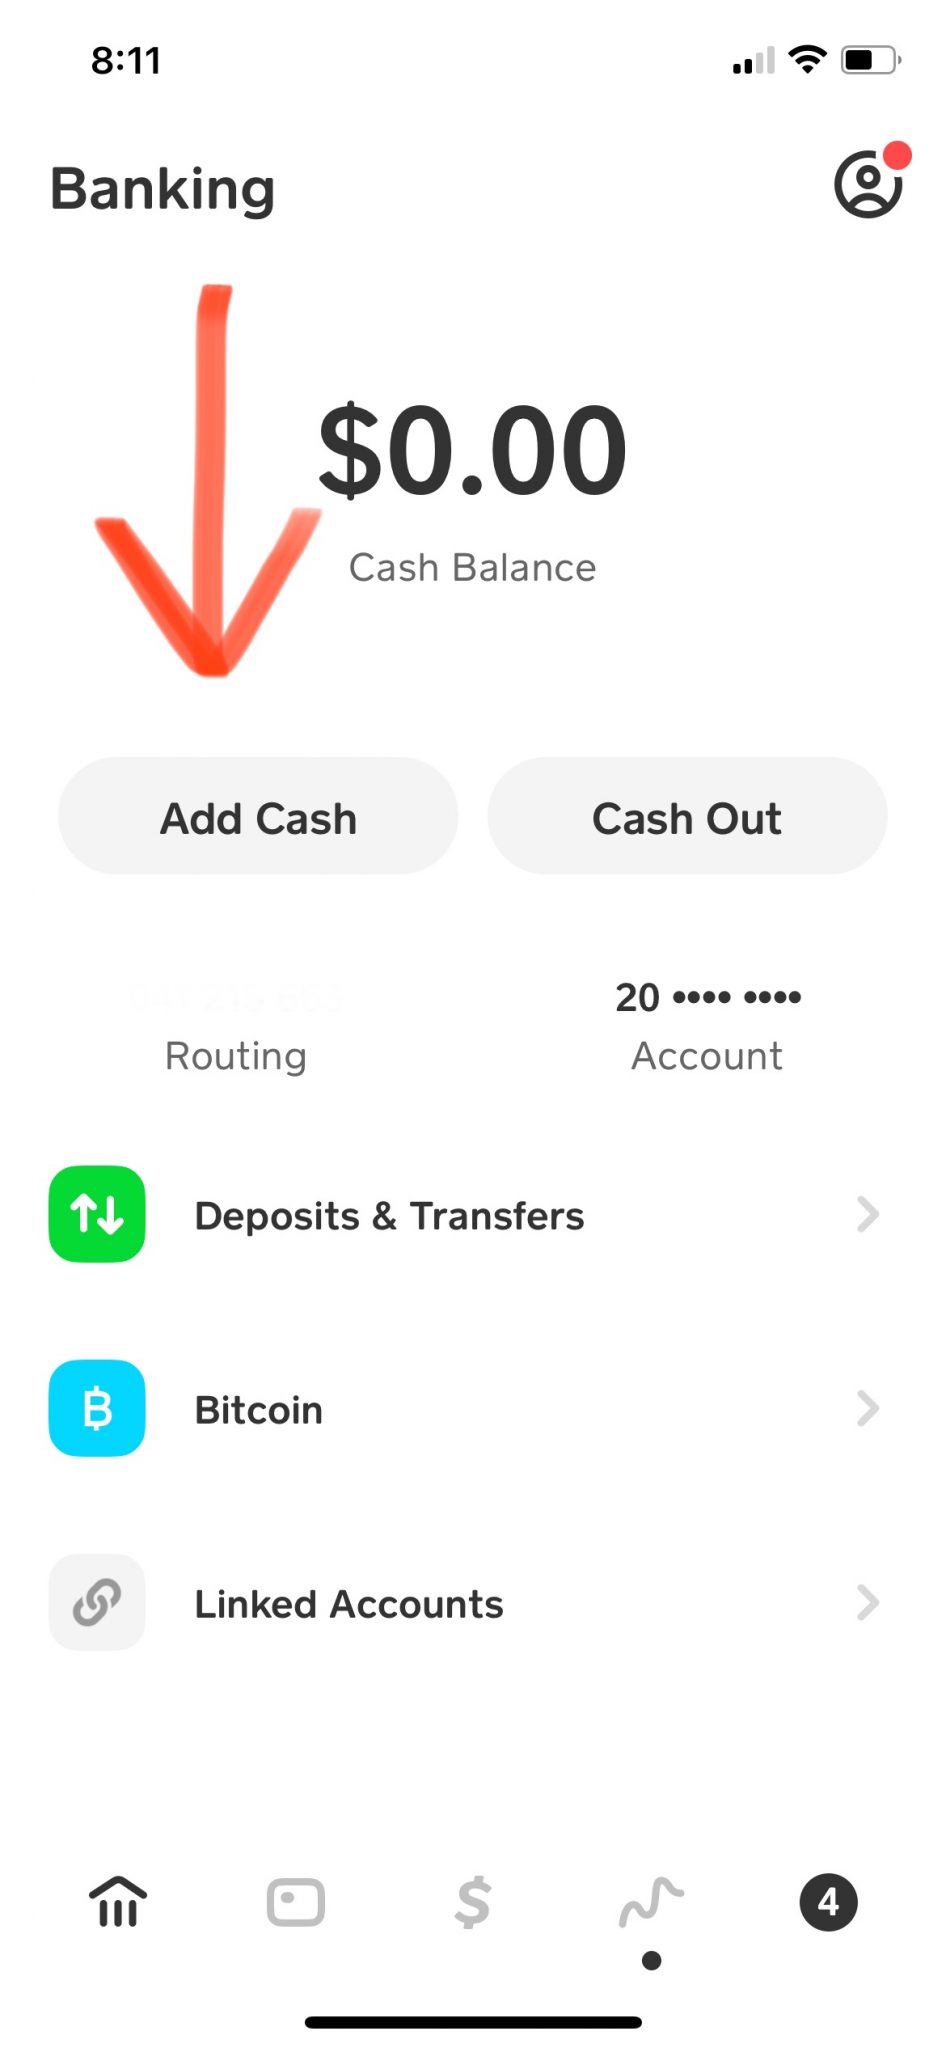 How to Add Money to Cash App Card in Store or Walmart?